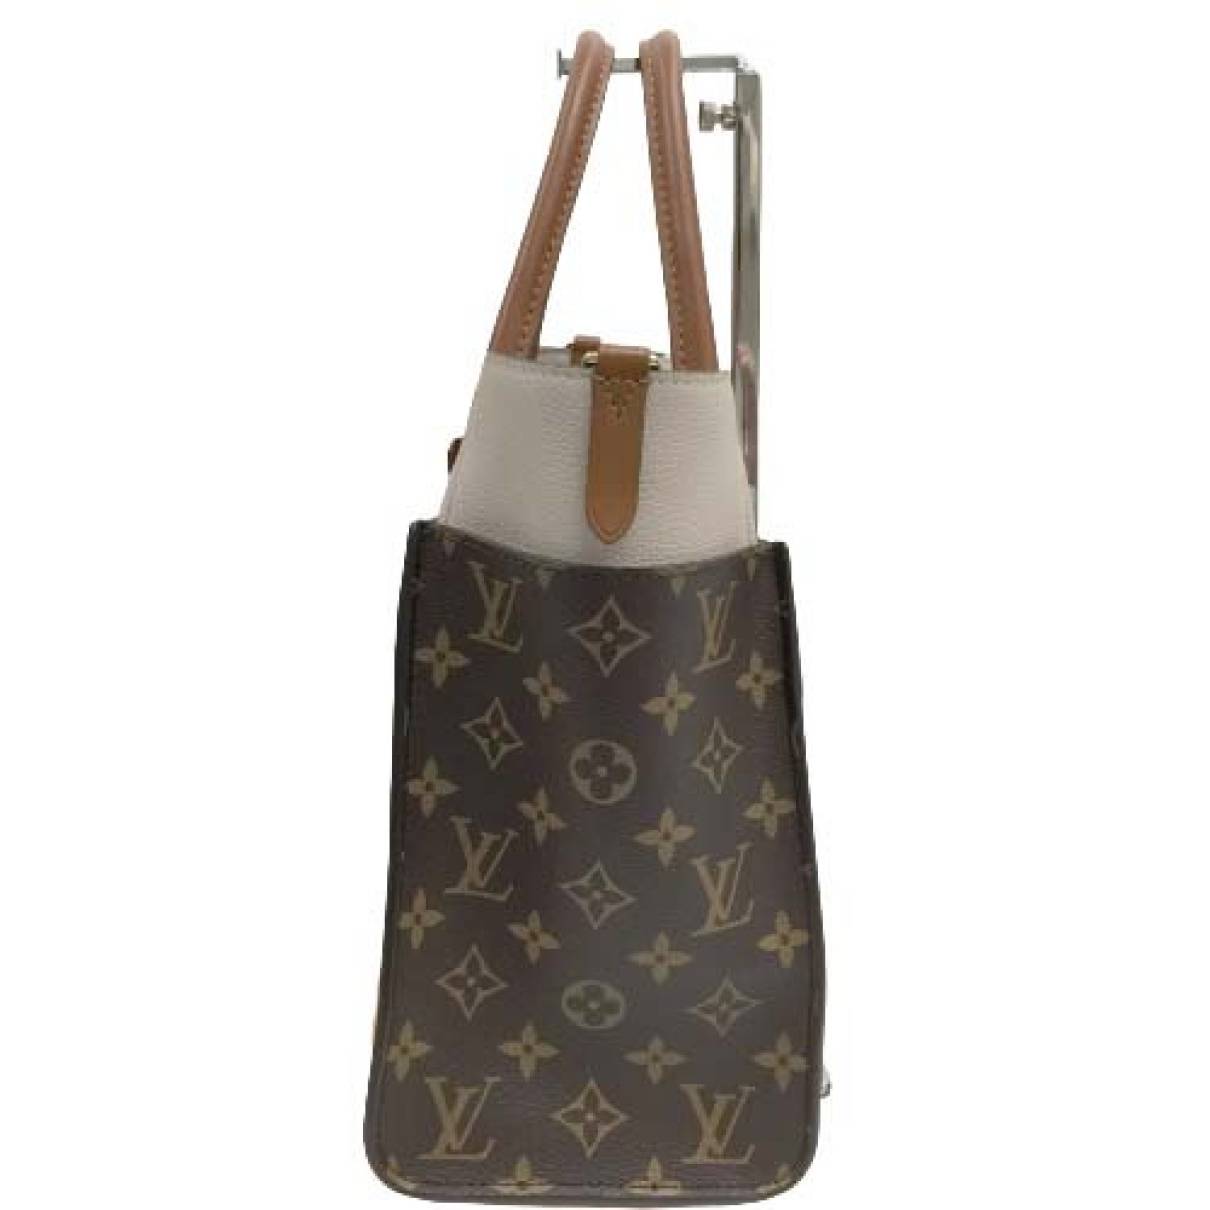 Louis Vuitton Authenticated on My Side Handbag